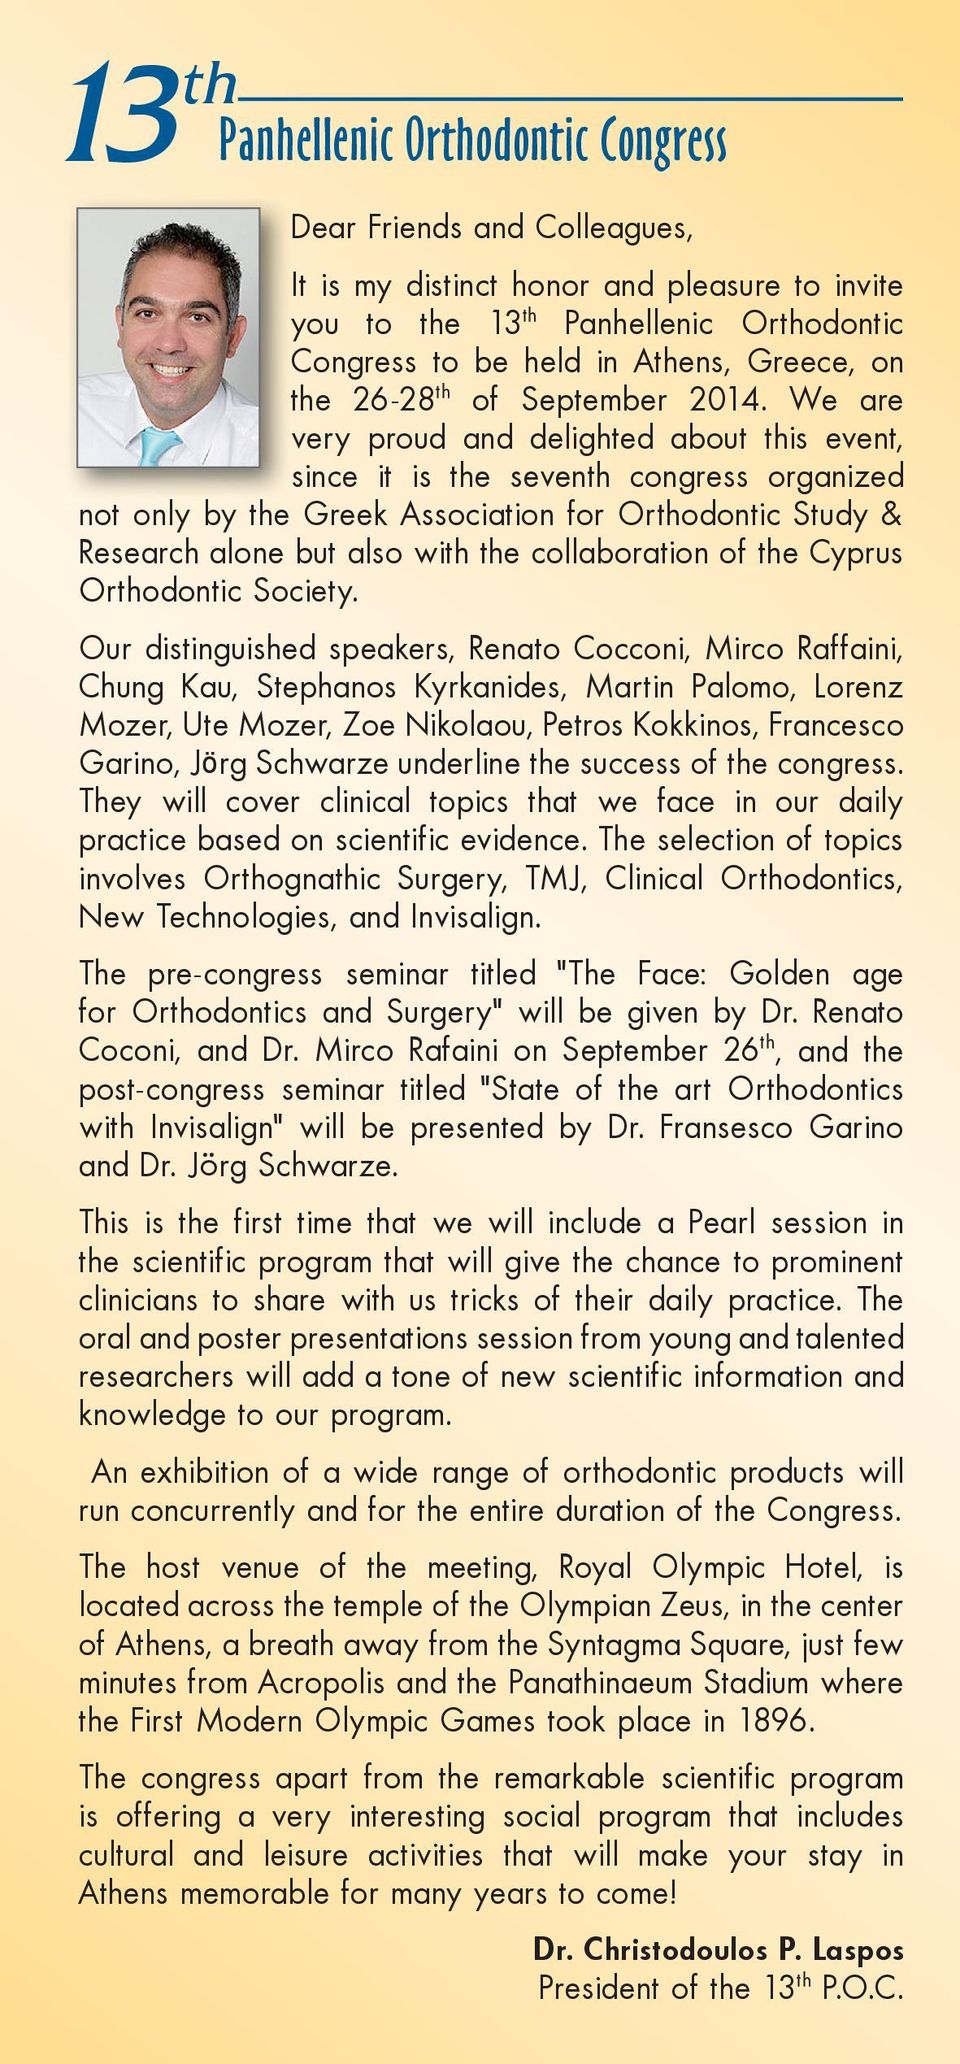 We are very proud and delighted about this event, since it is the seventh congress organized not only by the Greek Association for Orthodontic Study & Research alone but also with the collaboration